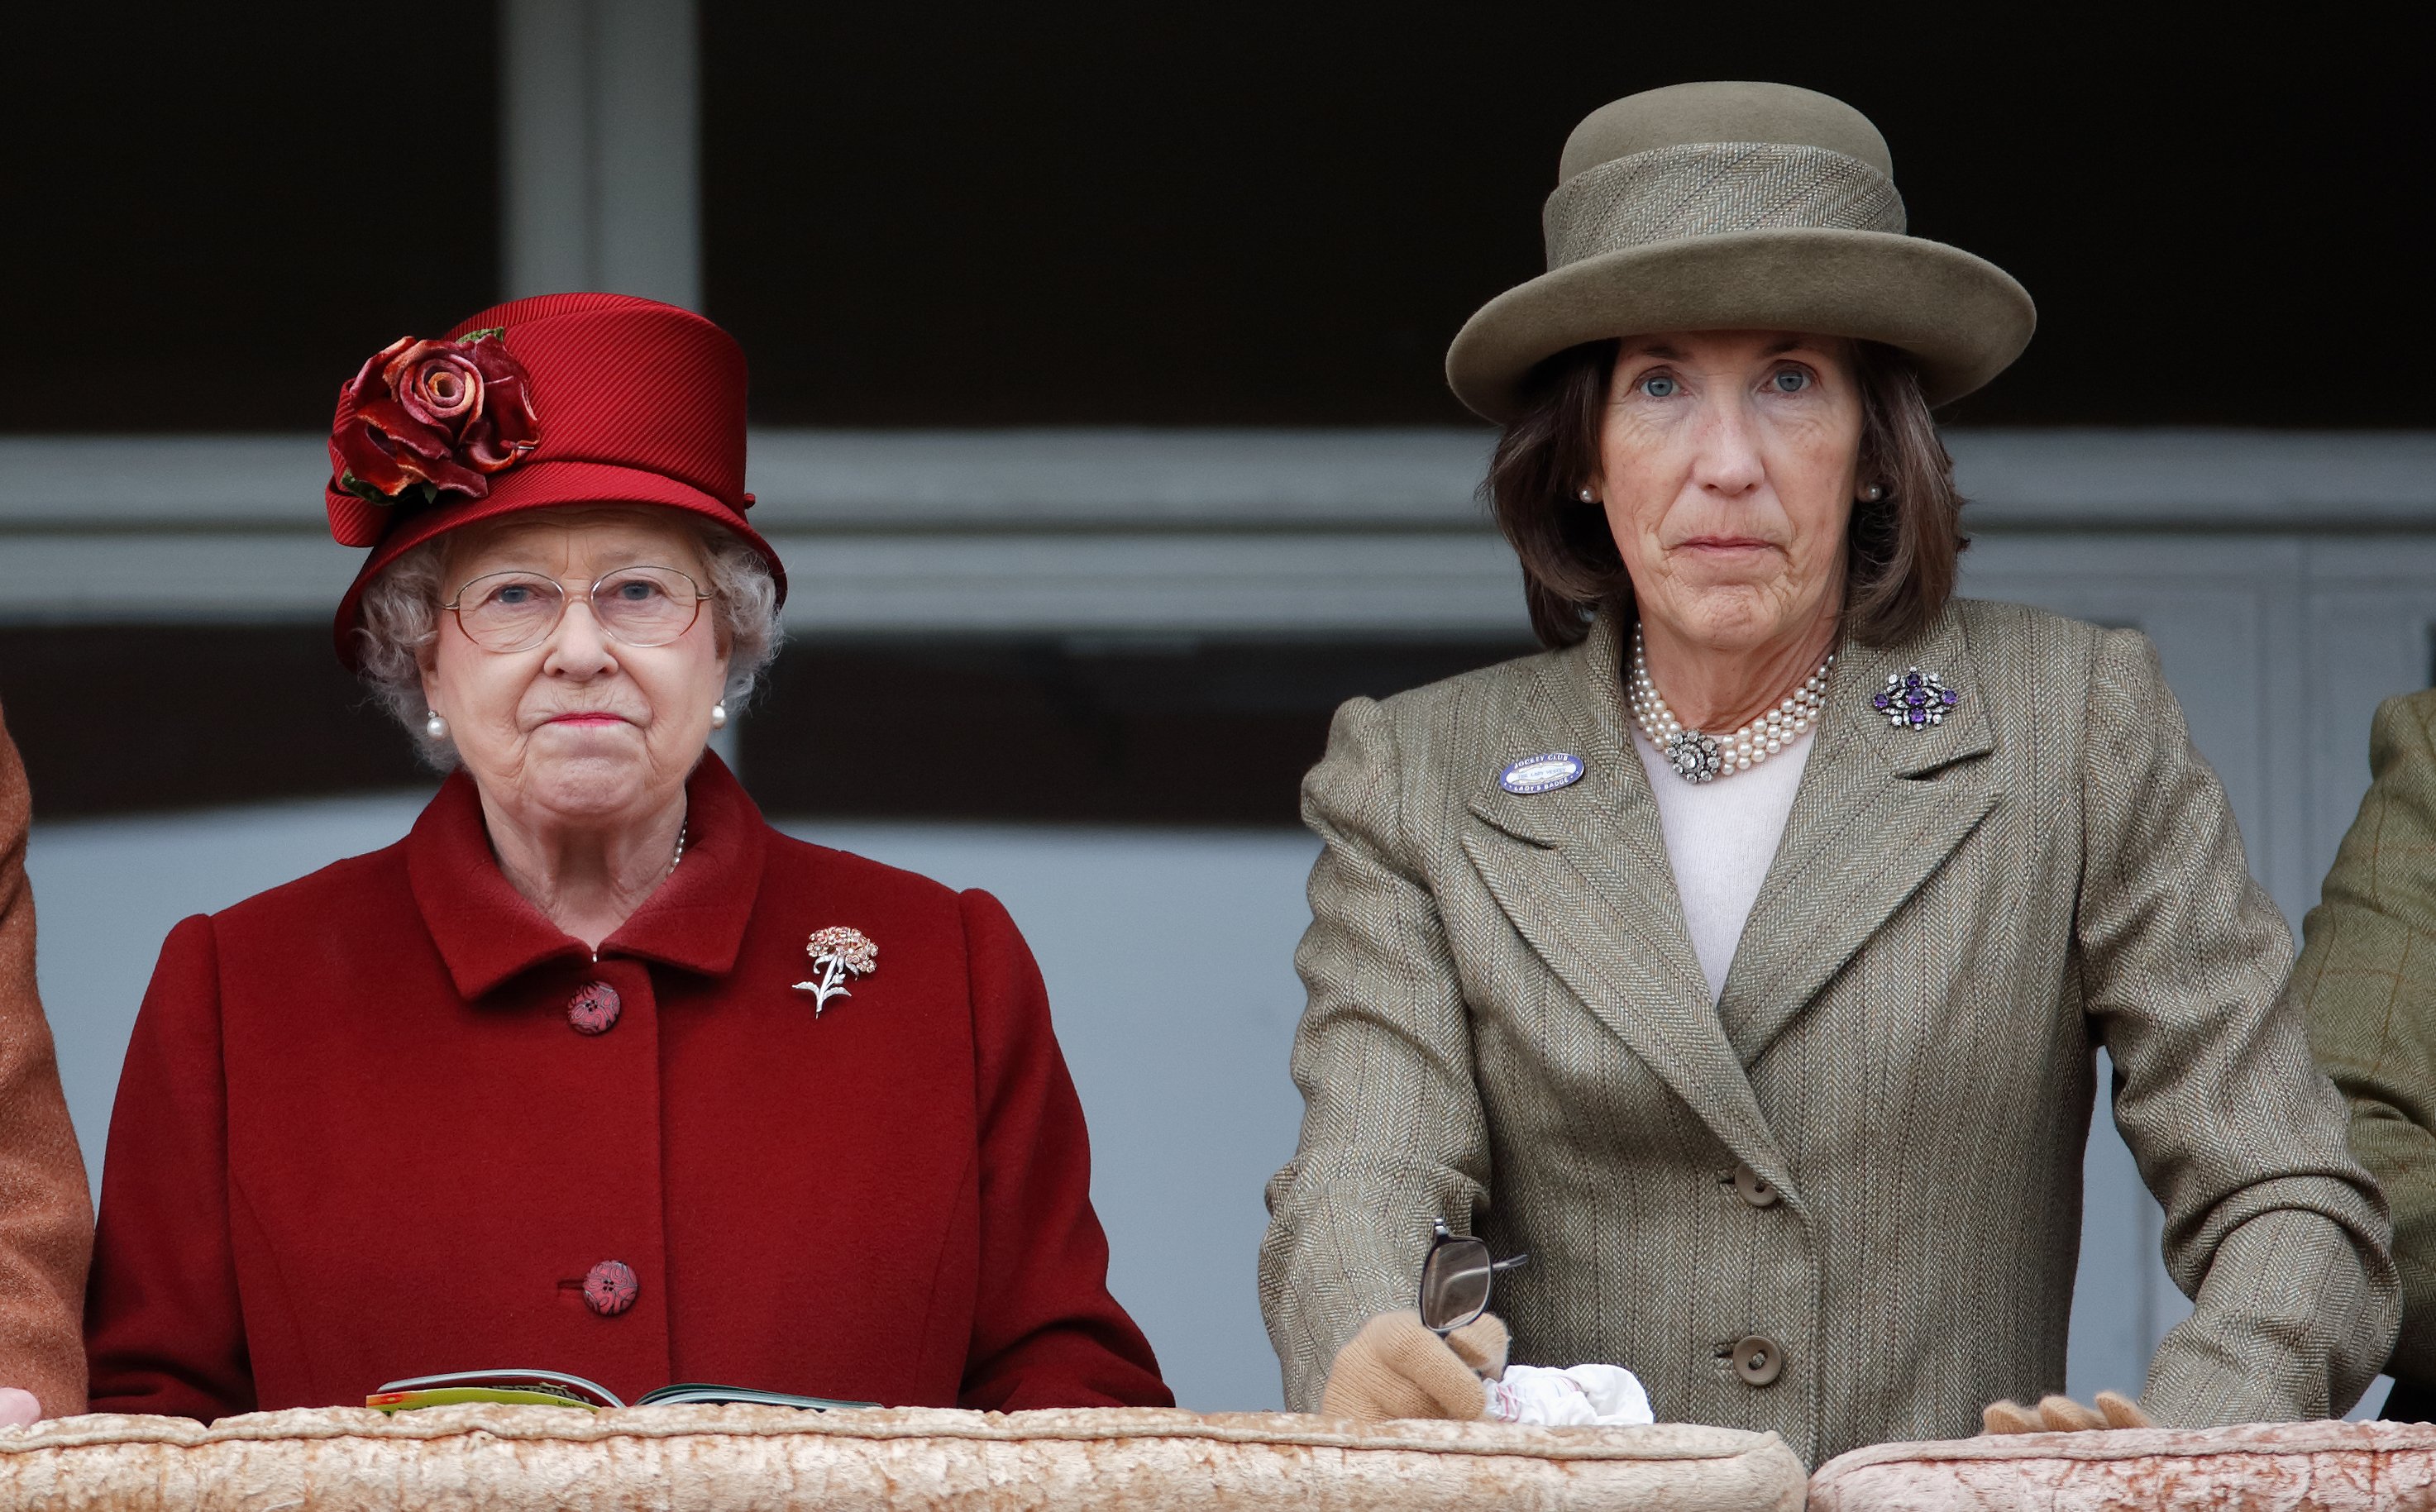 Queen Elizabeth II and Lady Celia Vestey at the Gold Cup Day of the Cheltenham Festival on March 13, 2009, in Cheltenham, England | Source: Getty Images